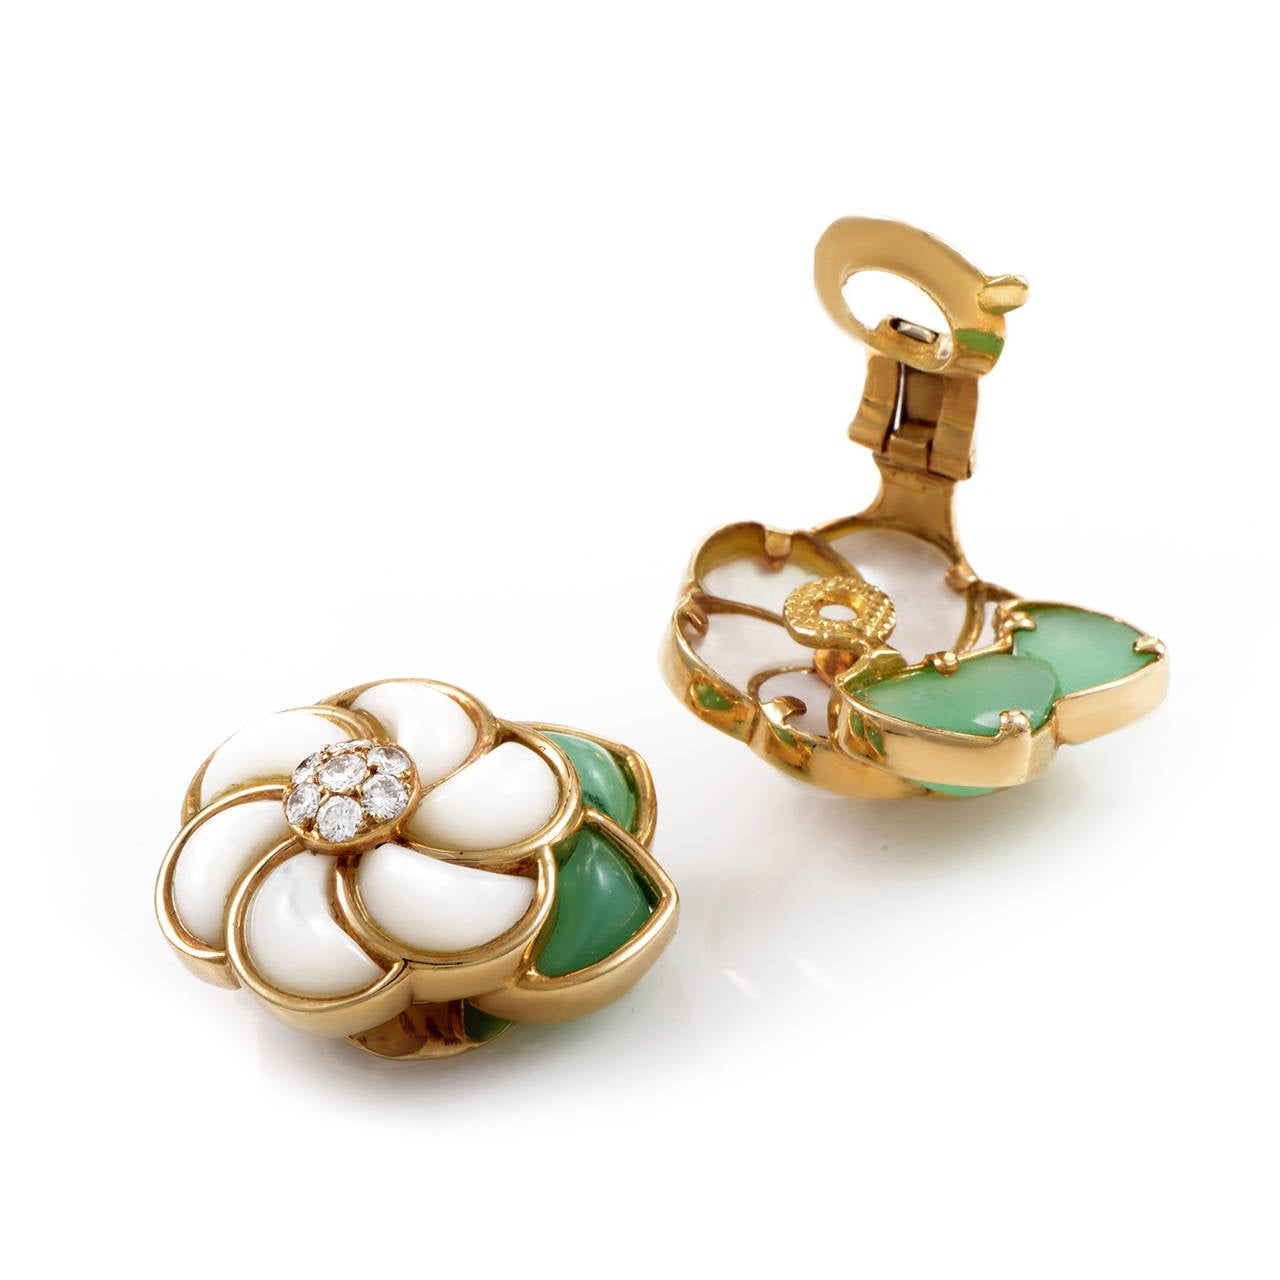 Feast your eyes upon the decadent design of this pair of earrings from Van Cleef & Arpels! The earrings are made of 18K yellow gold and depict flowers with diamond-set centers, mother of pearl petals, and green jade leaves. Absolutely